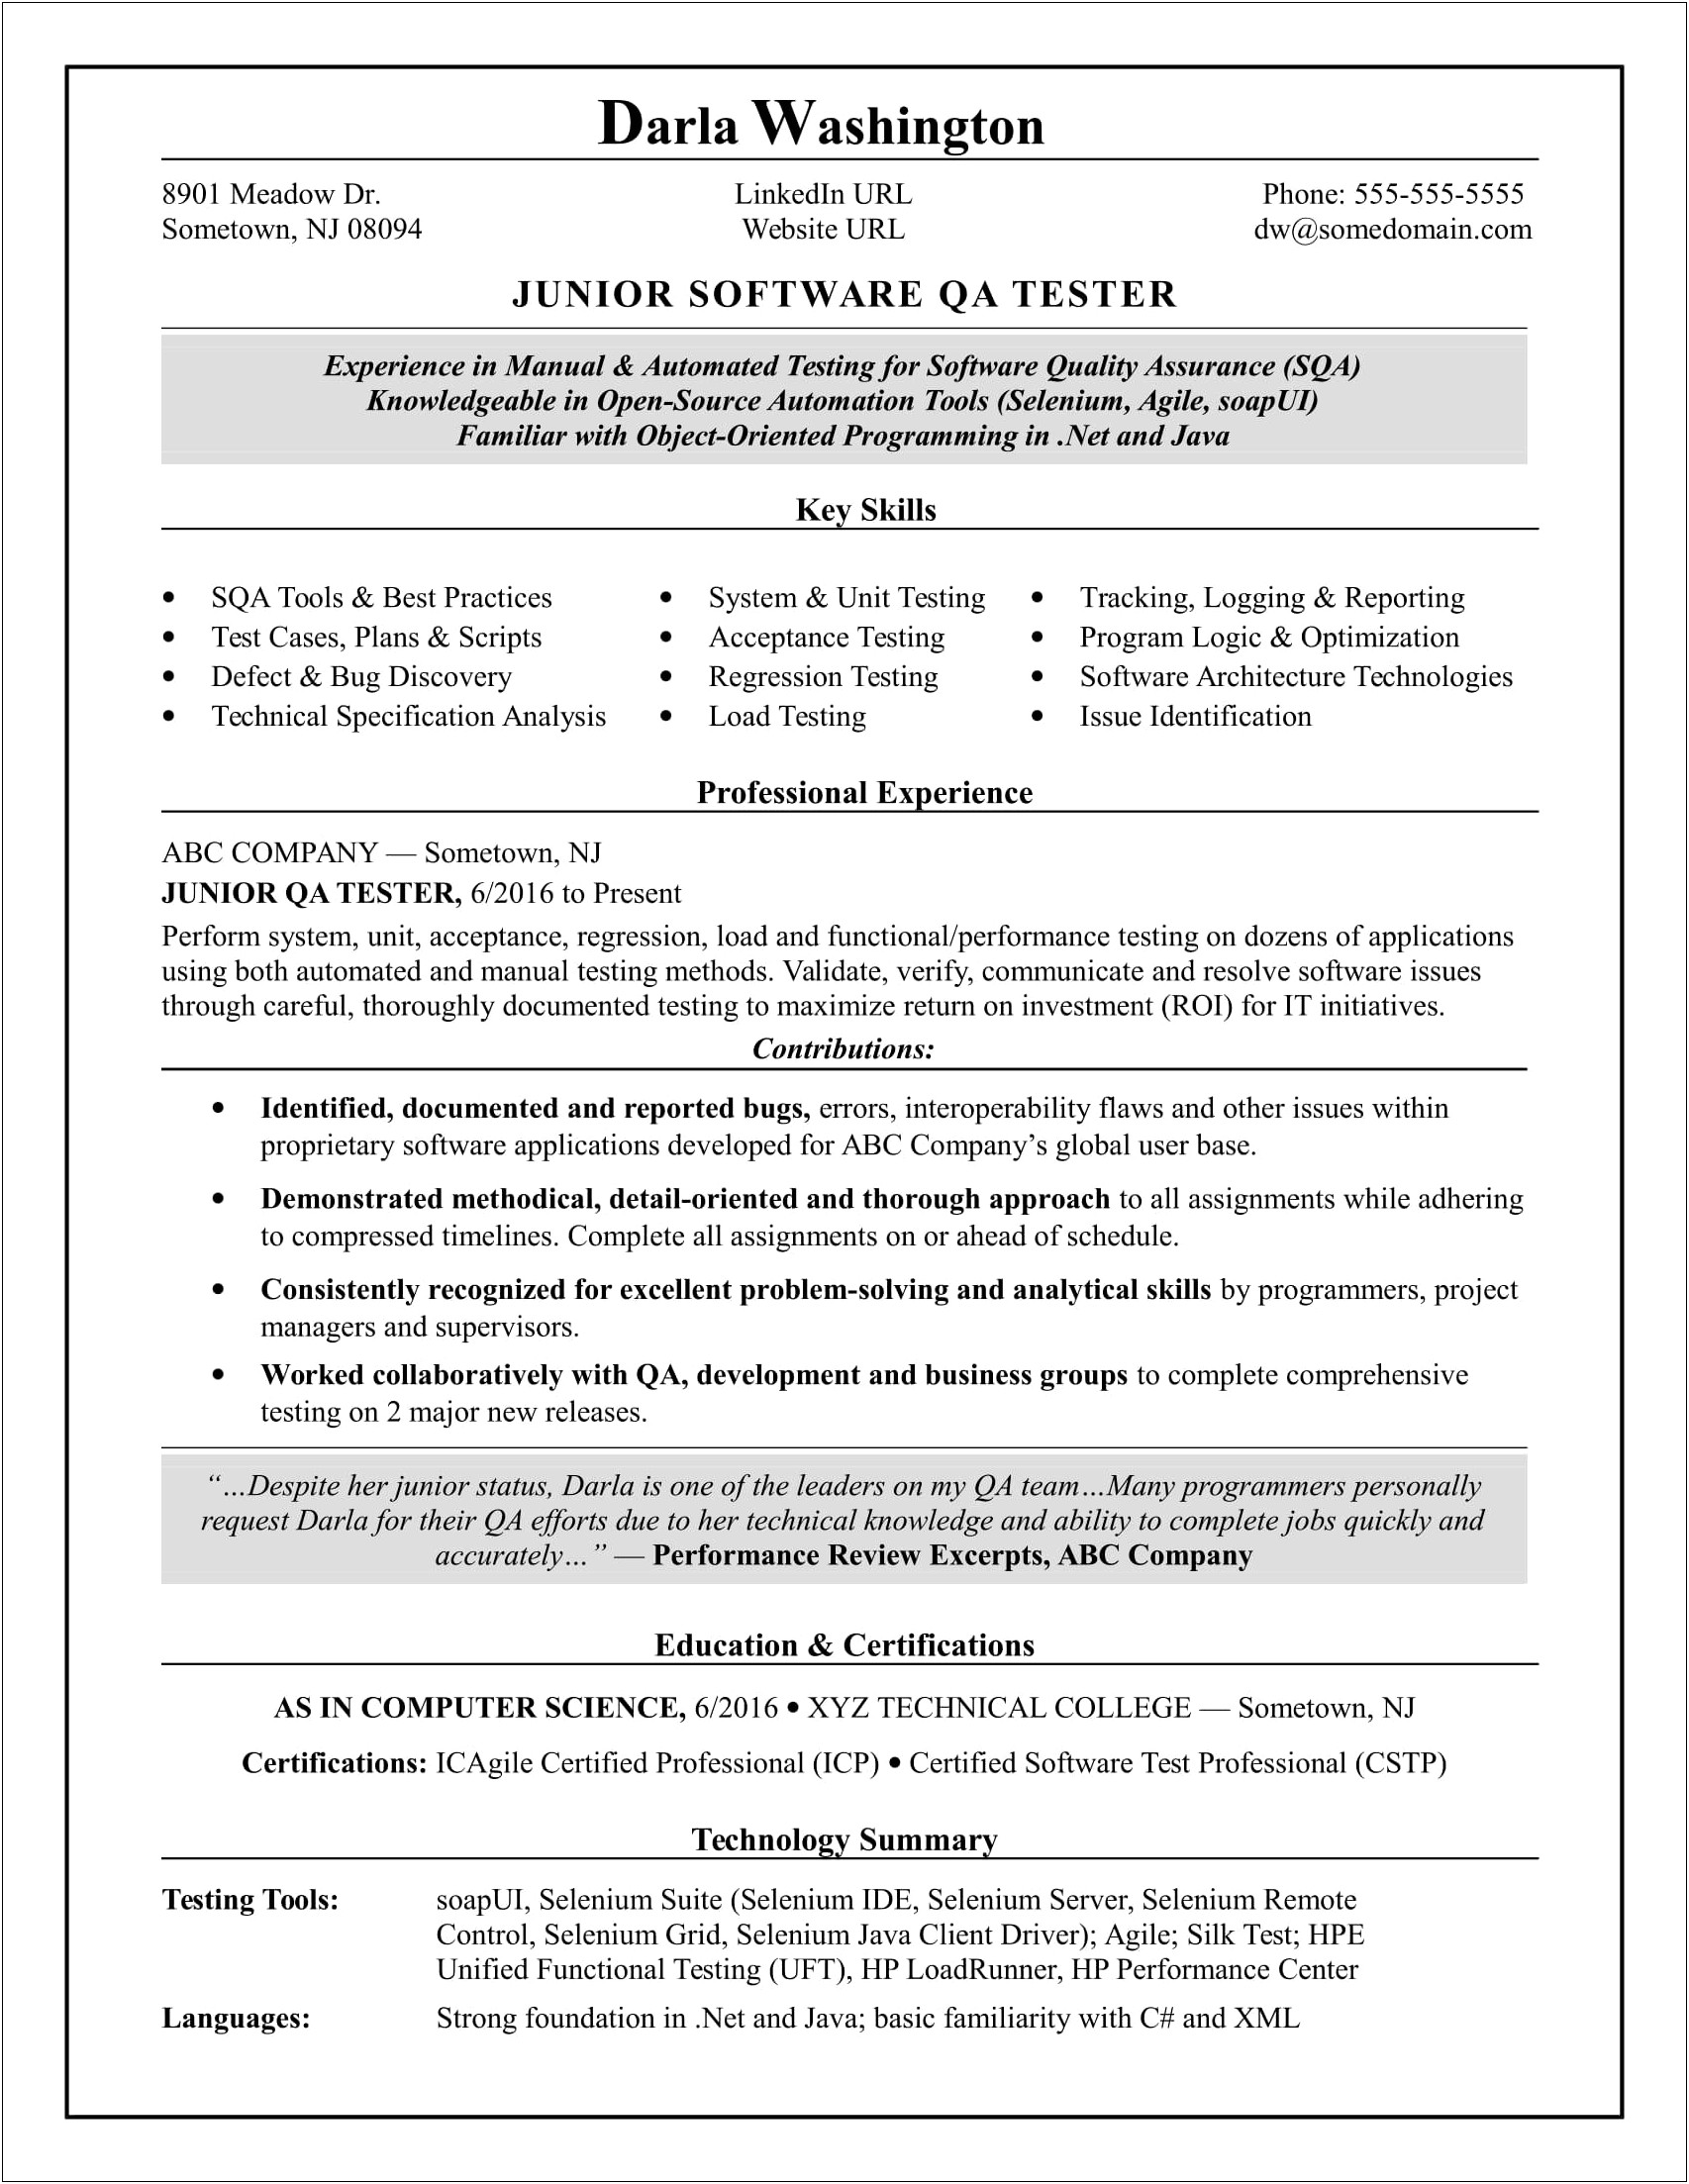 Manual Testing One Year Experience Resume